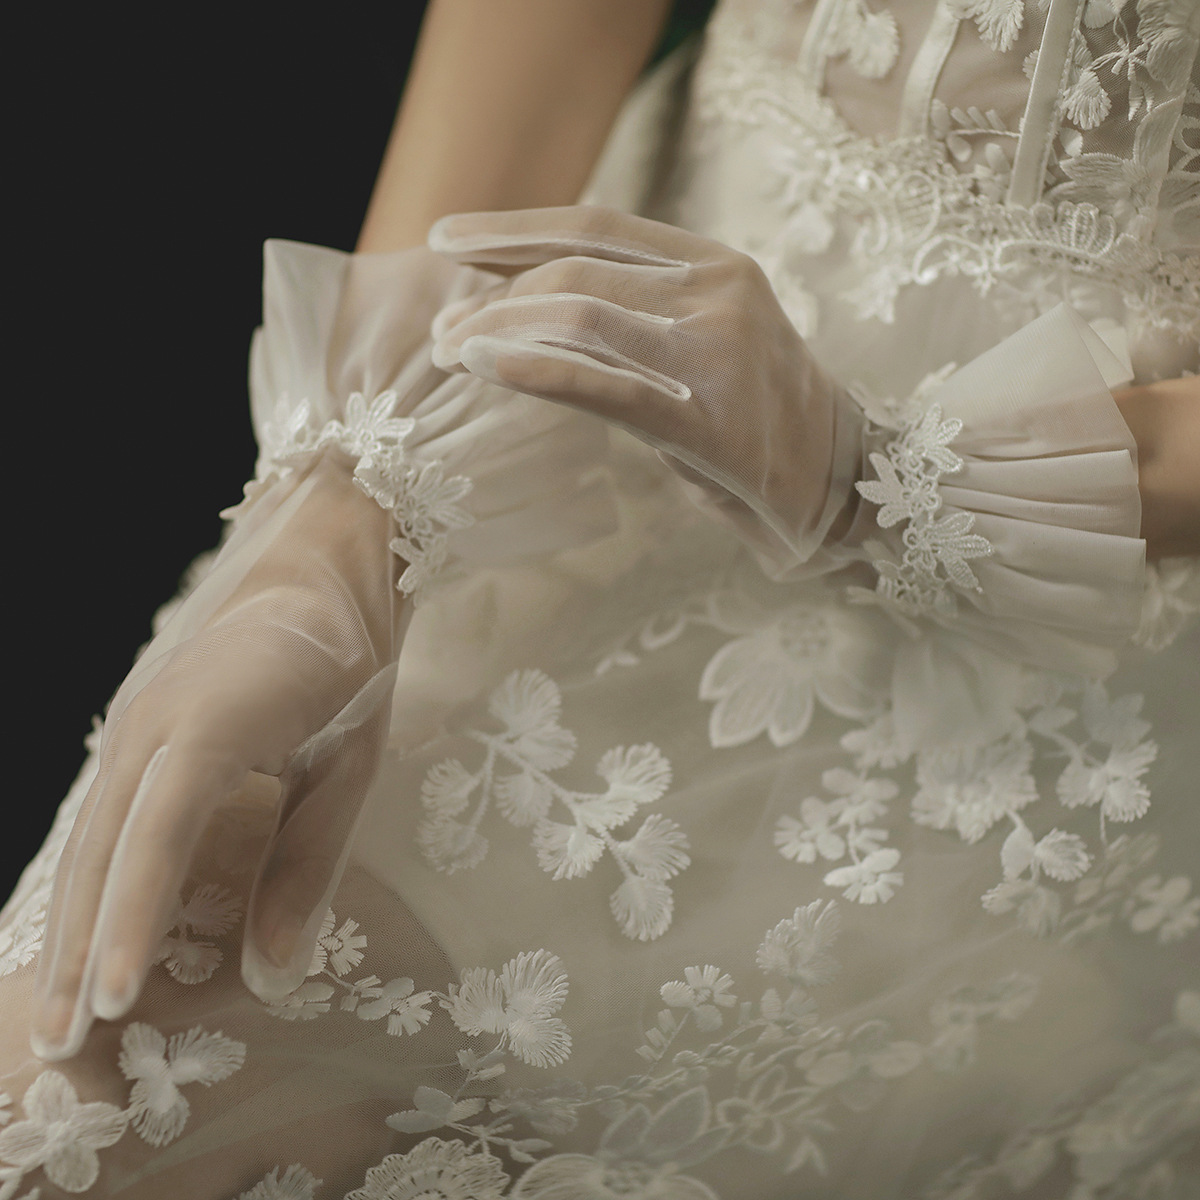 Bride Wedding Gown Lace Gloves White Ceremonial Wedding Gloves Custom Made Dress, Gloves Are